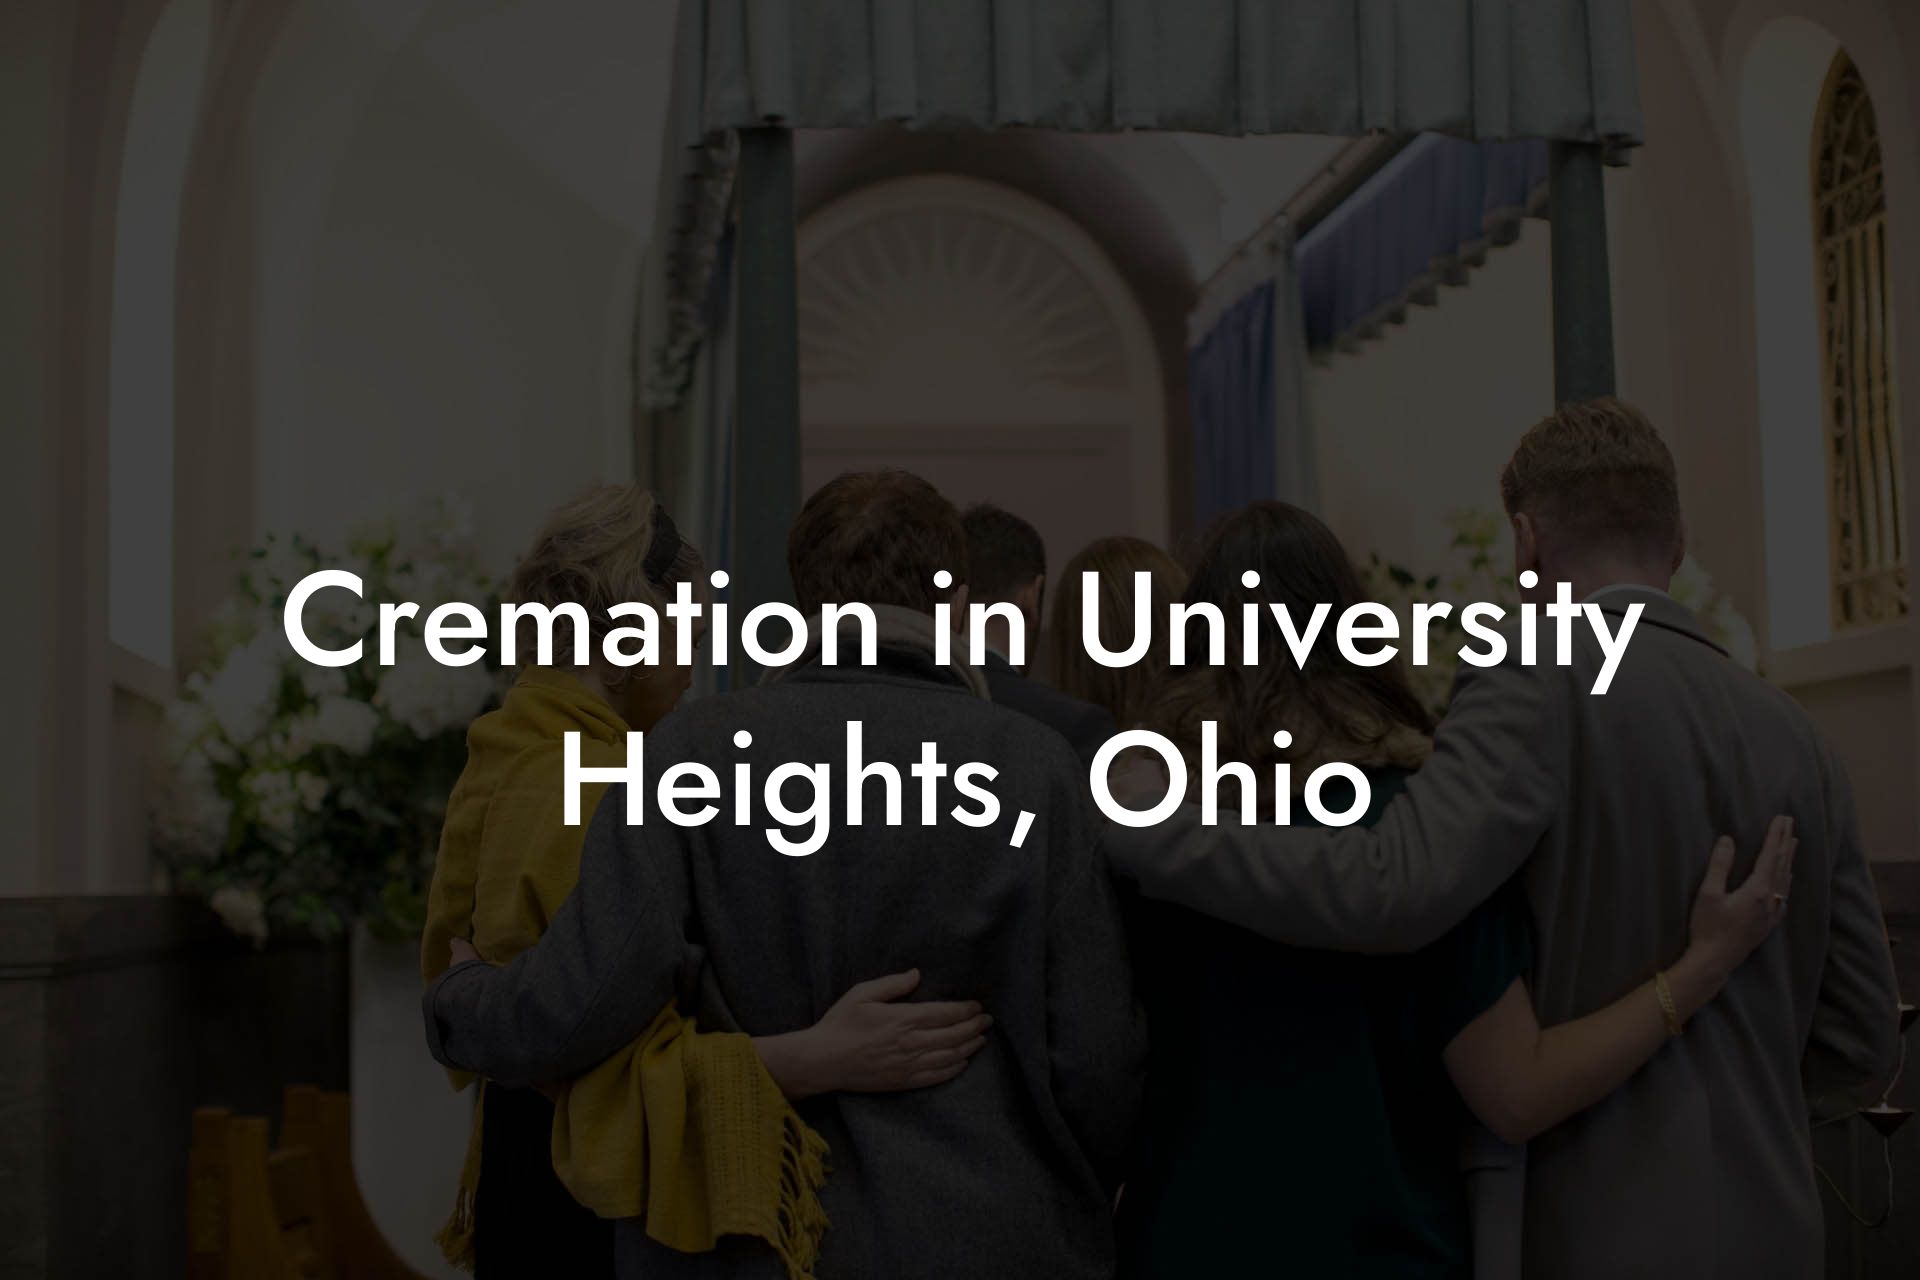 Cremation in University Heights, Ohio